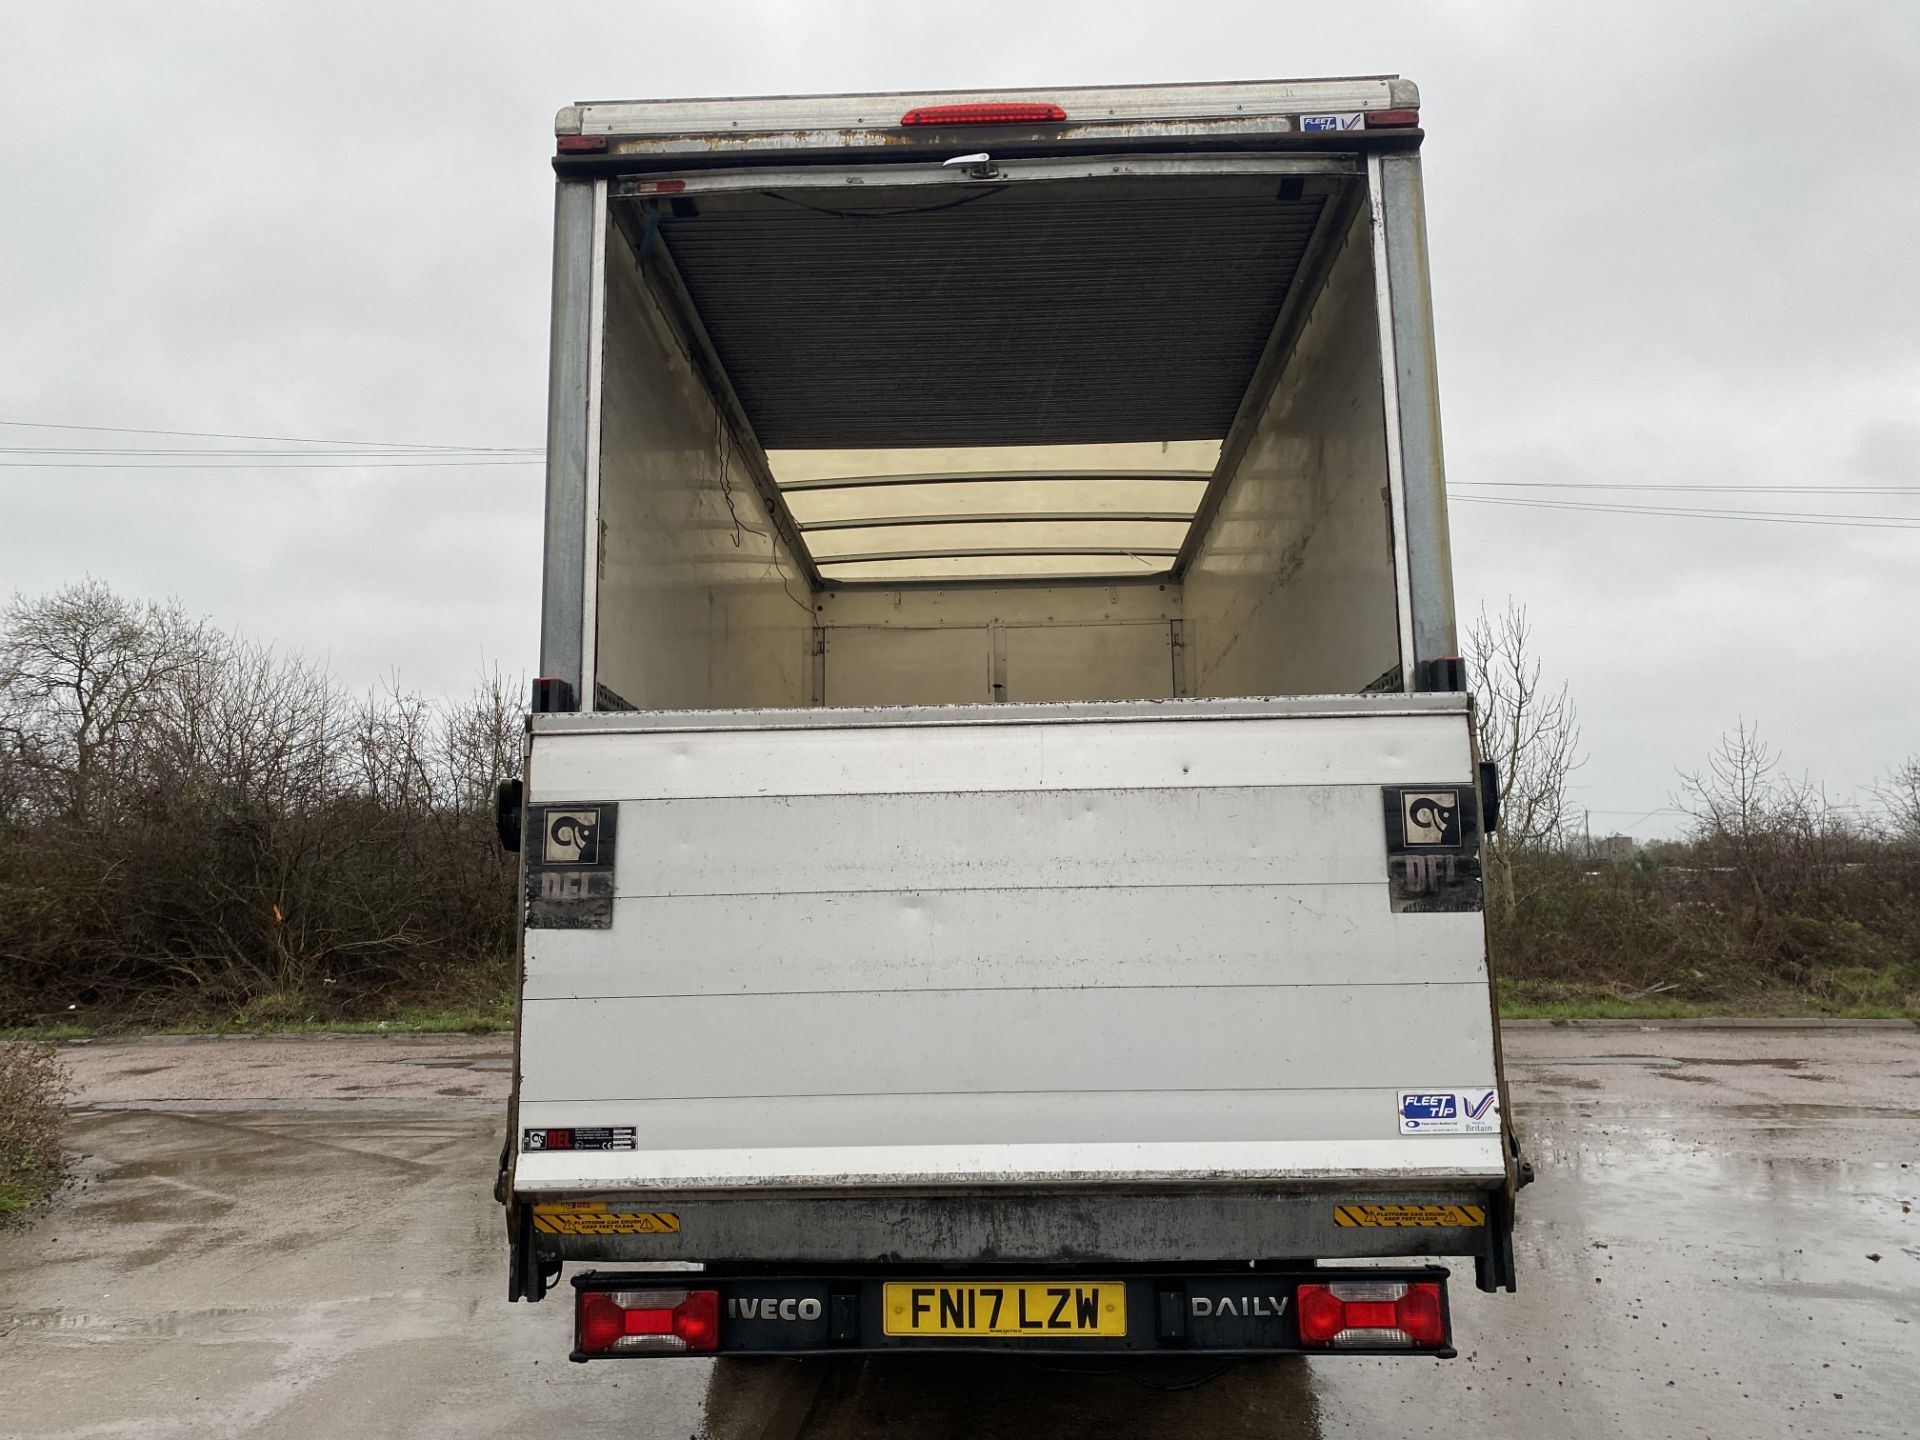 ON SALE IVECO DAILY 35C16 (160) "LWB" LUTON BOX VAN "EURO 6"ELECTRIC TAIL LIFT - 17 REG - NEW SHAPE - Image 7 of 22